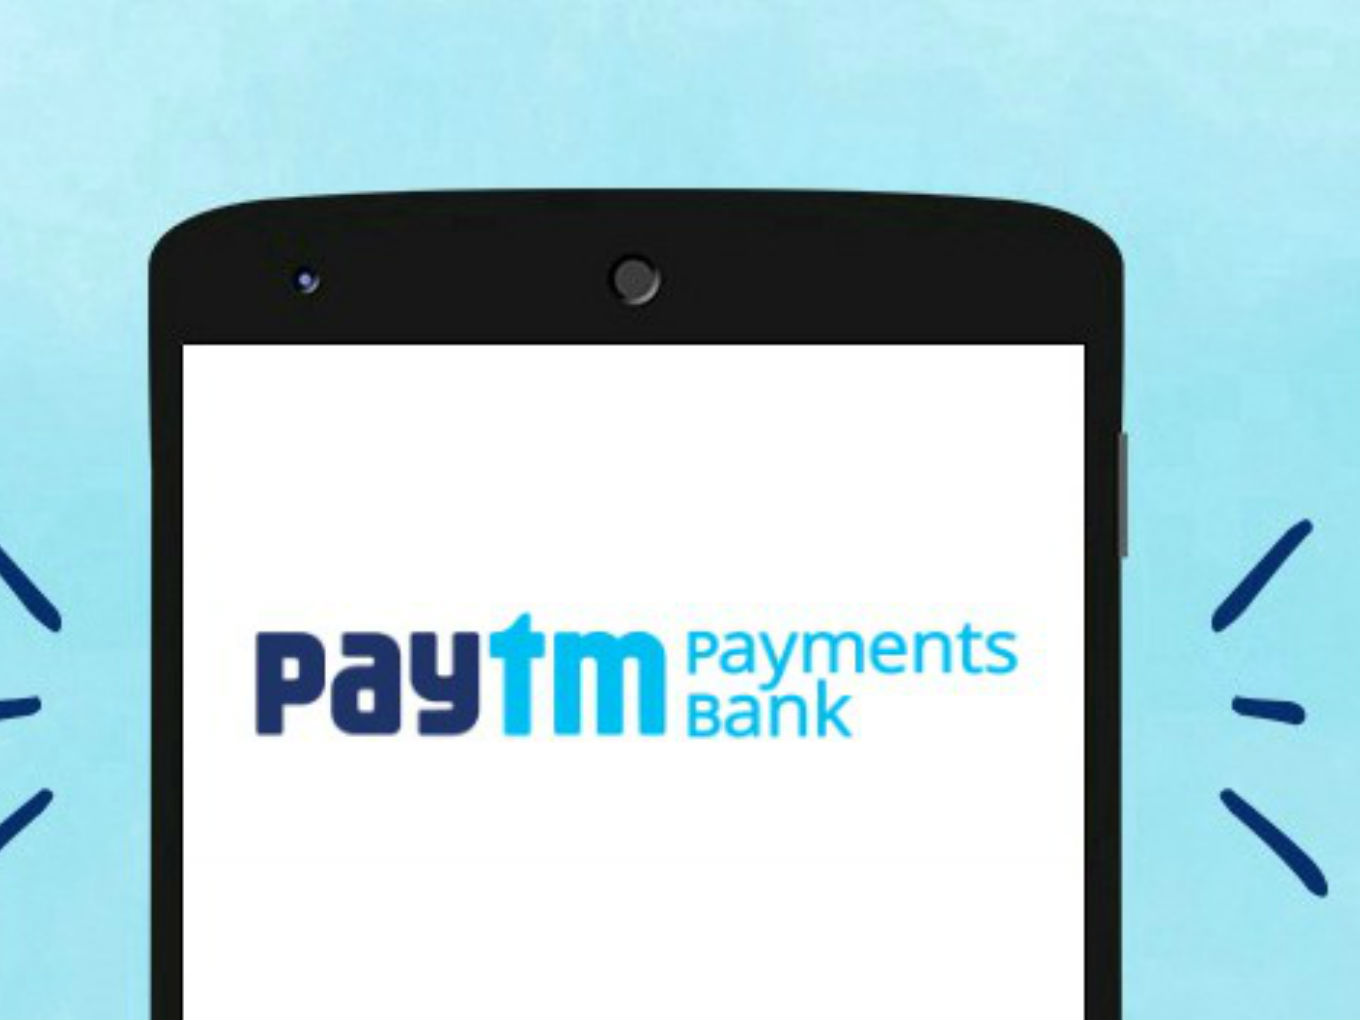 5 Months After RBI Lifts New Customer Ban, Paytm Payments Bank Sees New Legal Hurdle